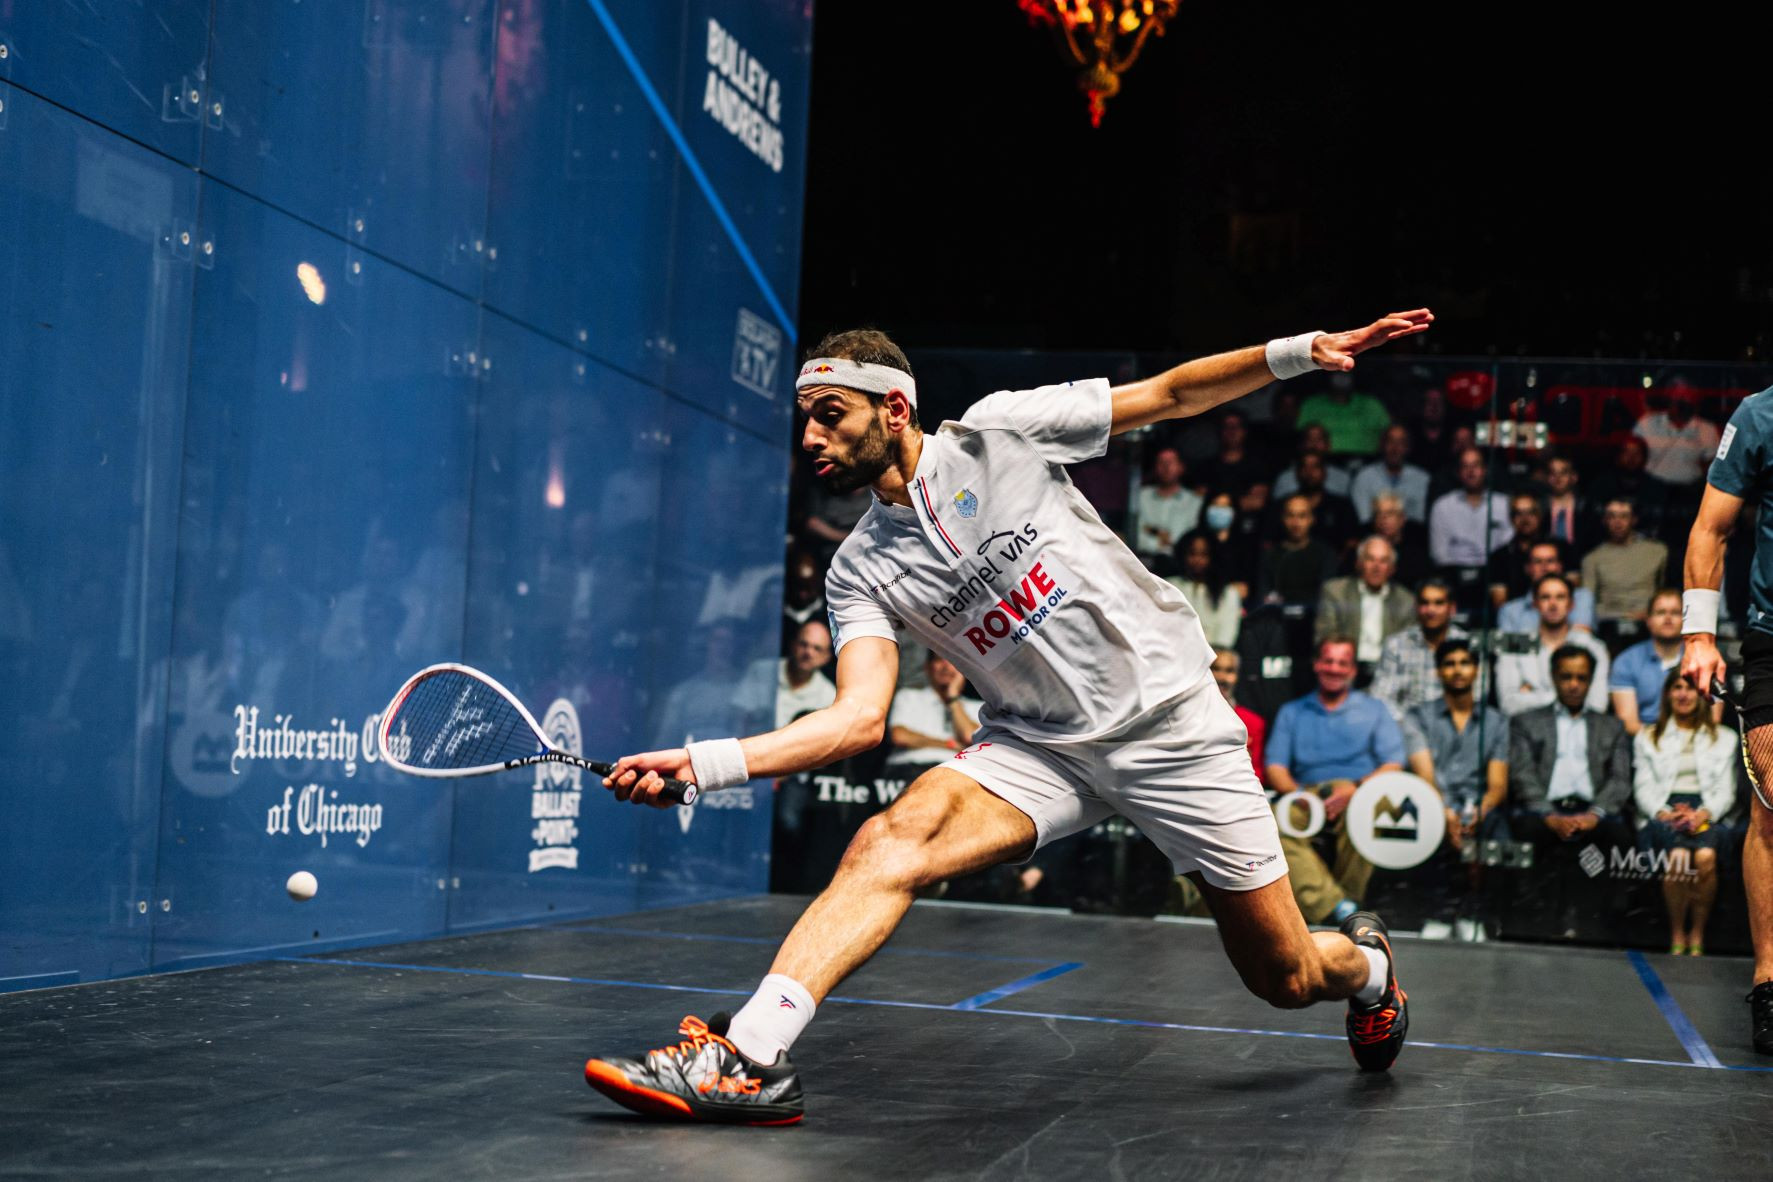 Former squash world number one ElShorbagy to represent England for first time at Mauritius Open